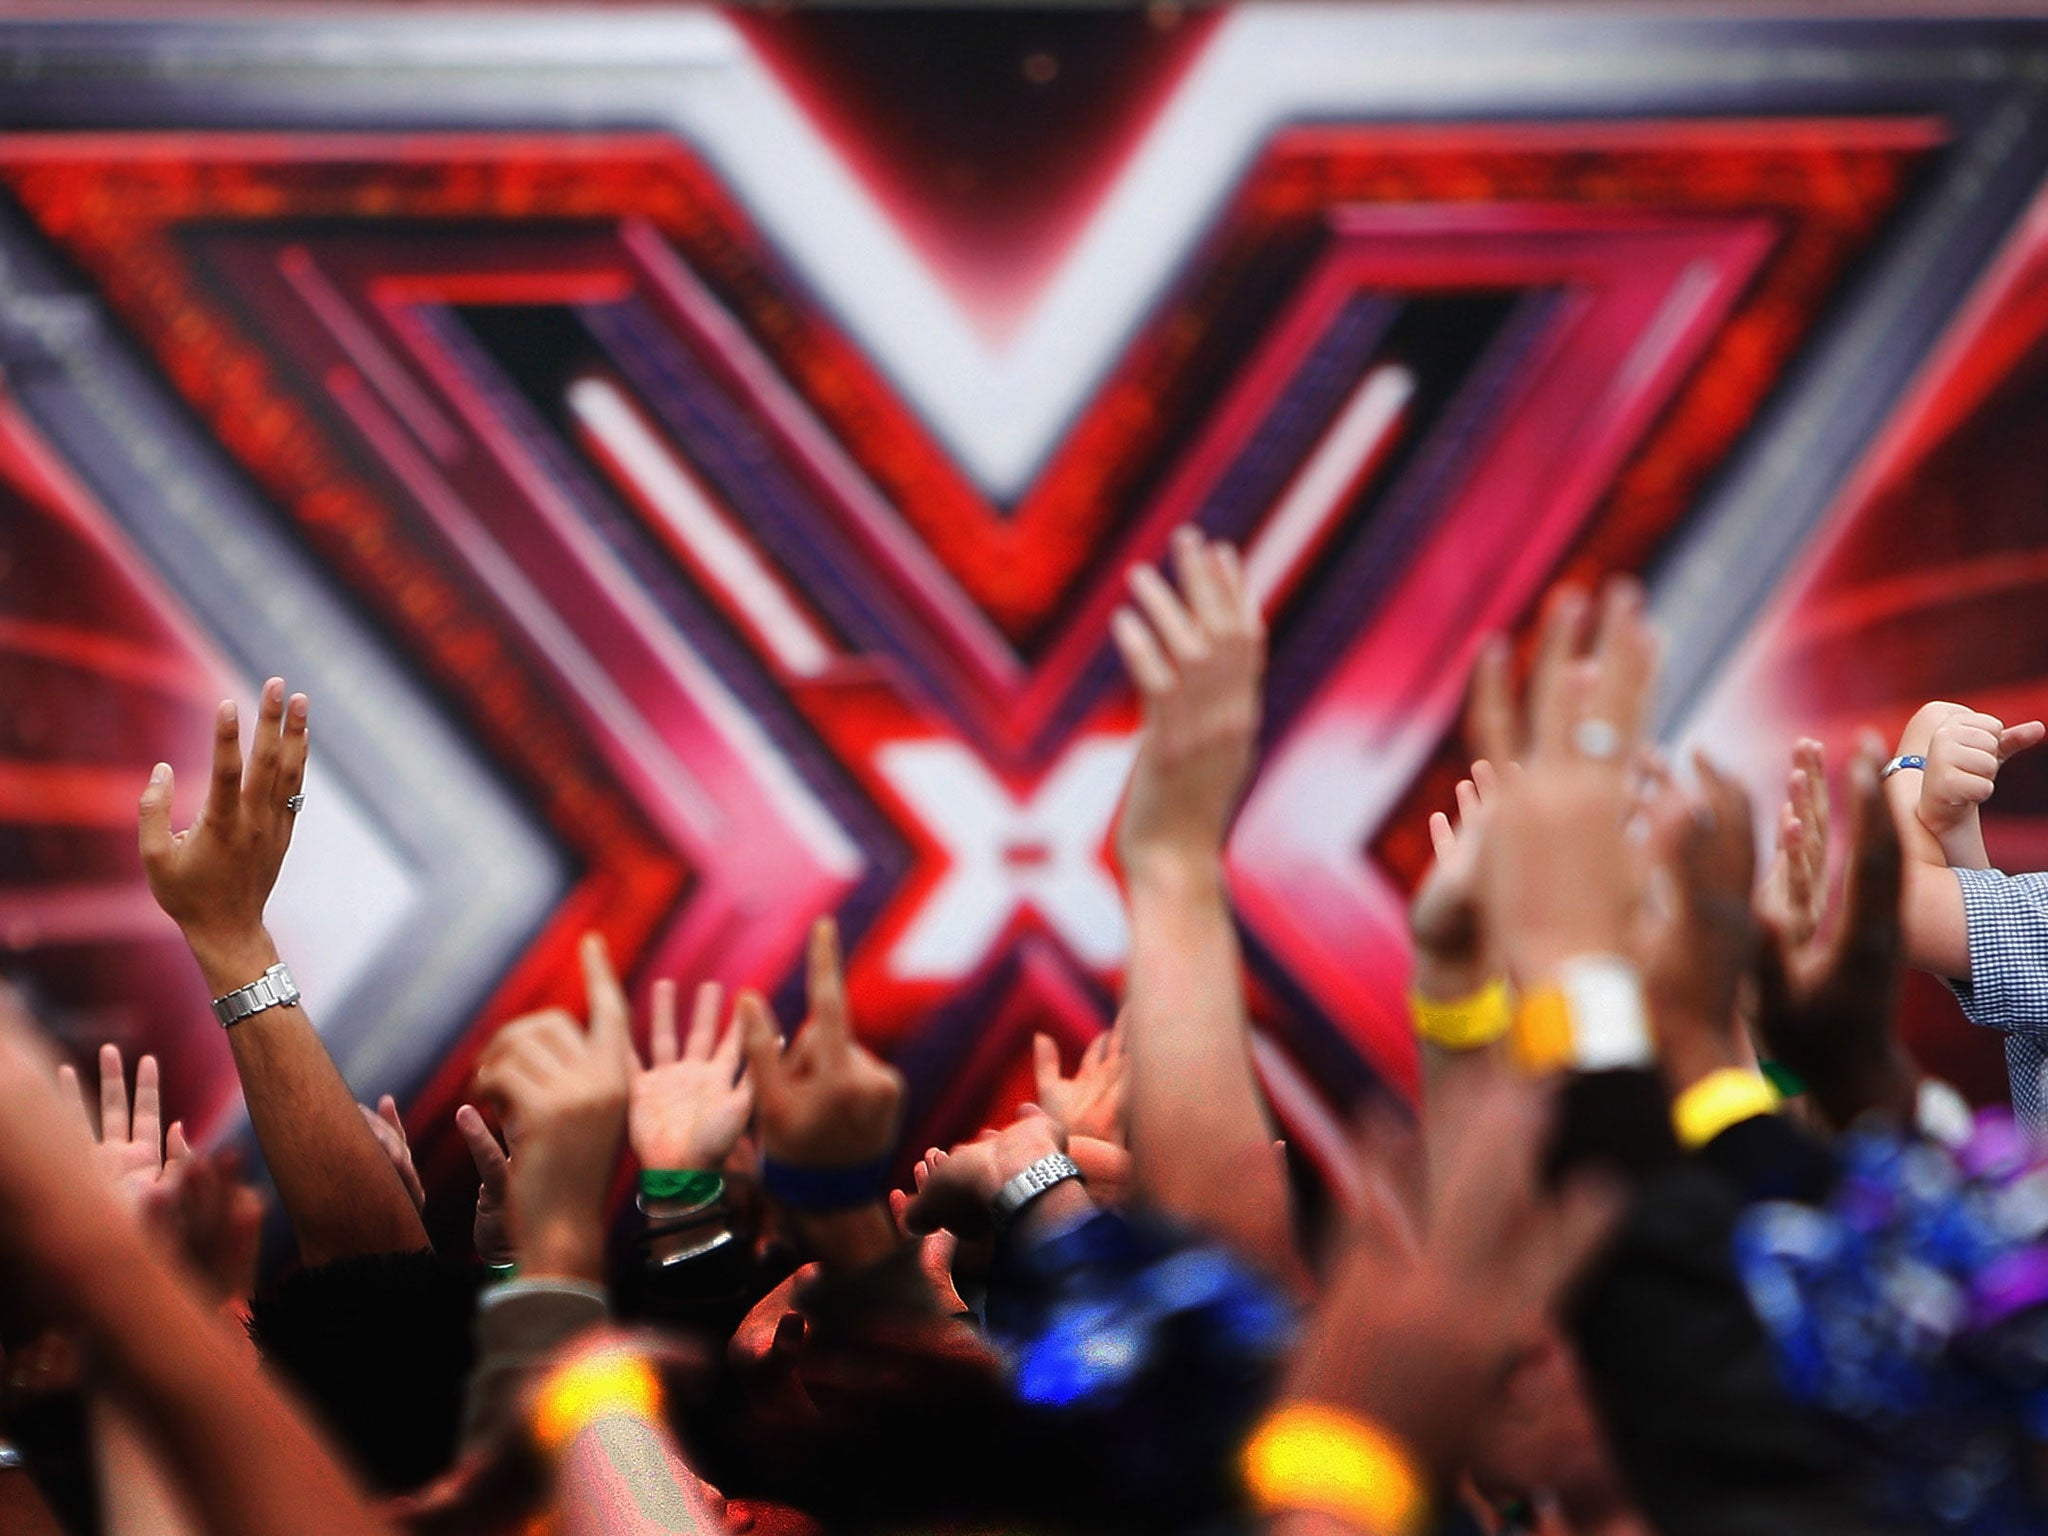 Ratings for The X Factor had been declining